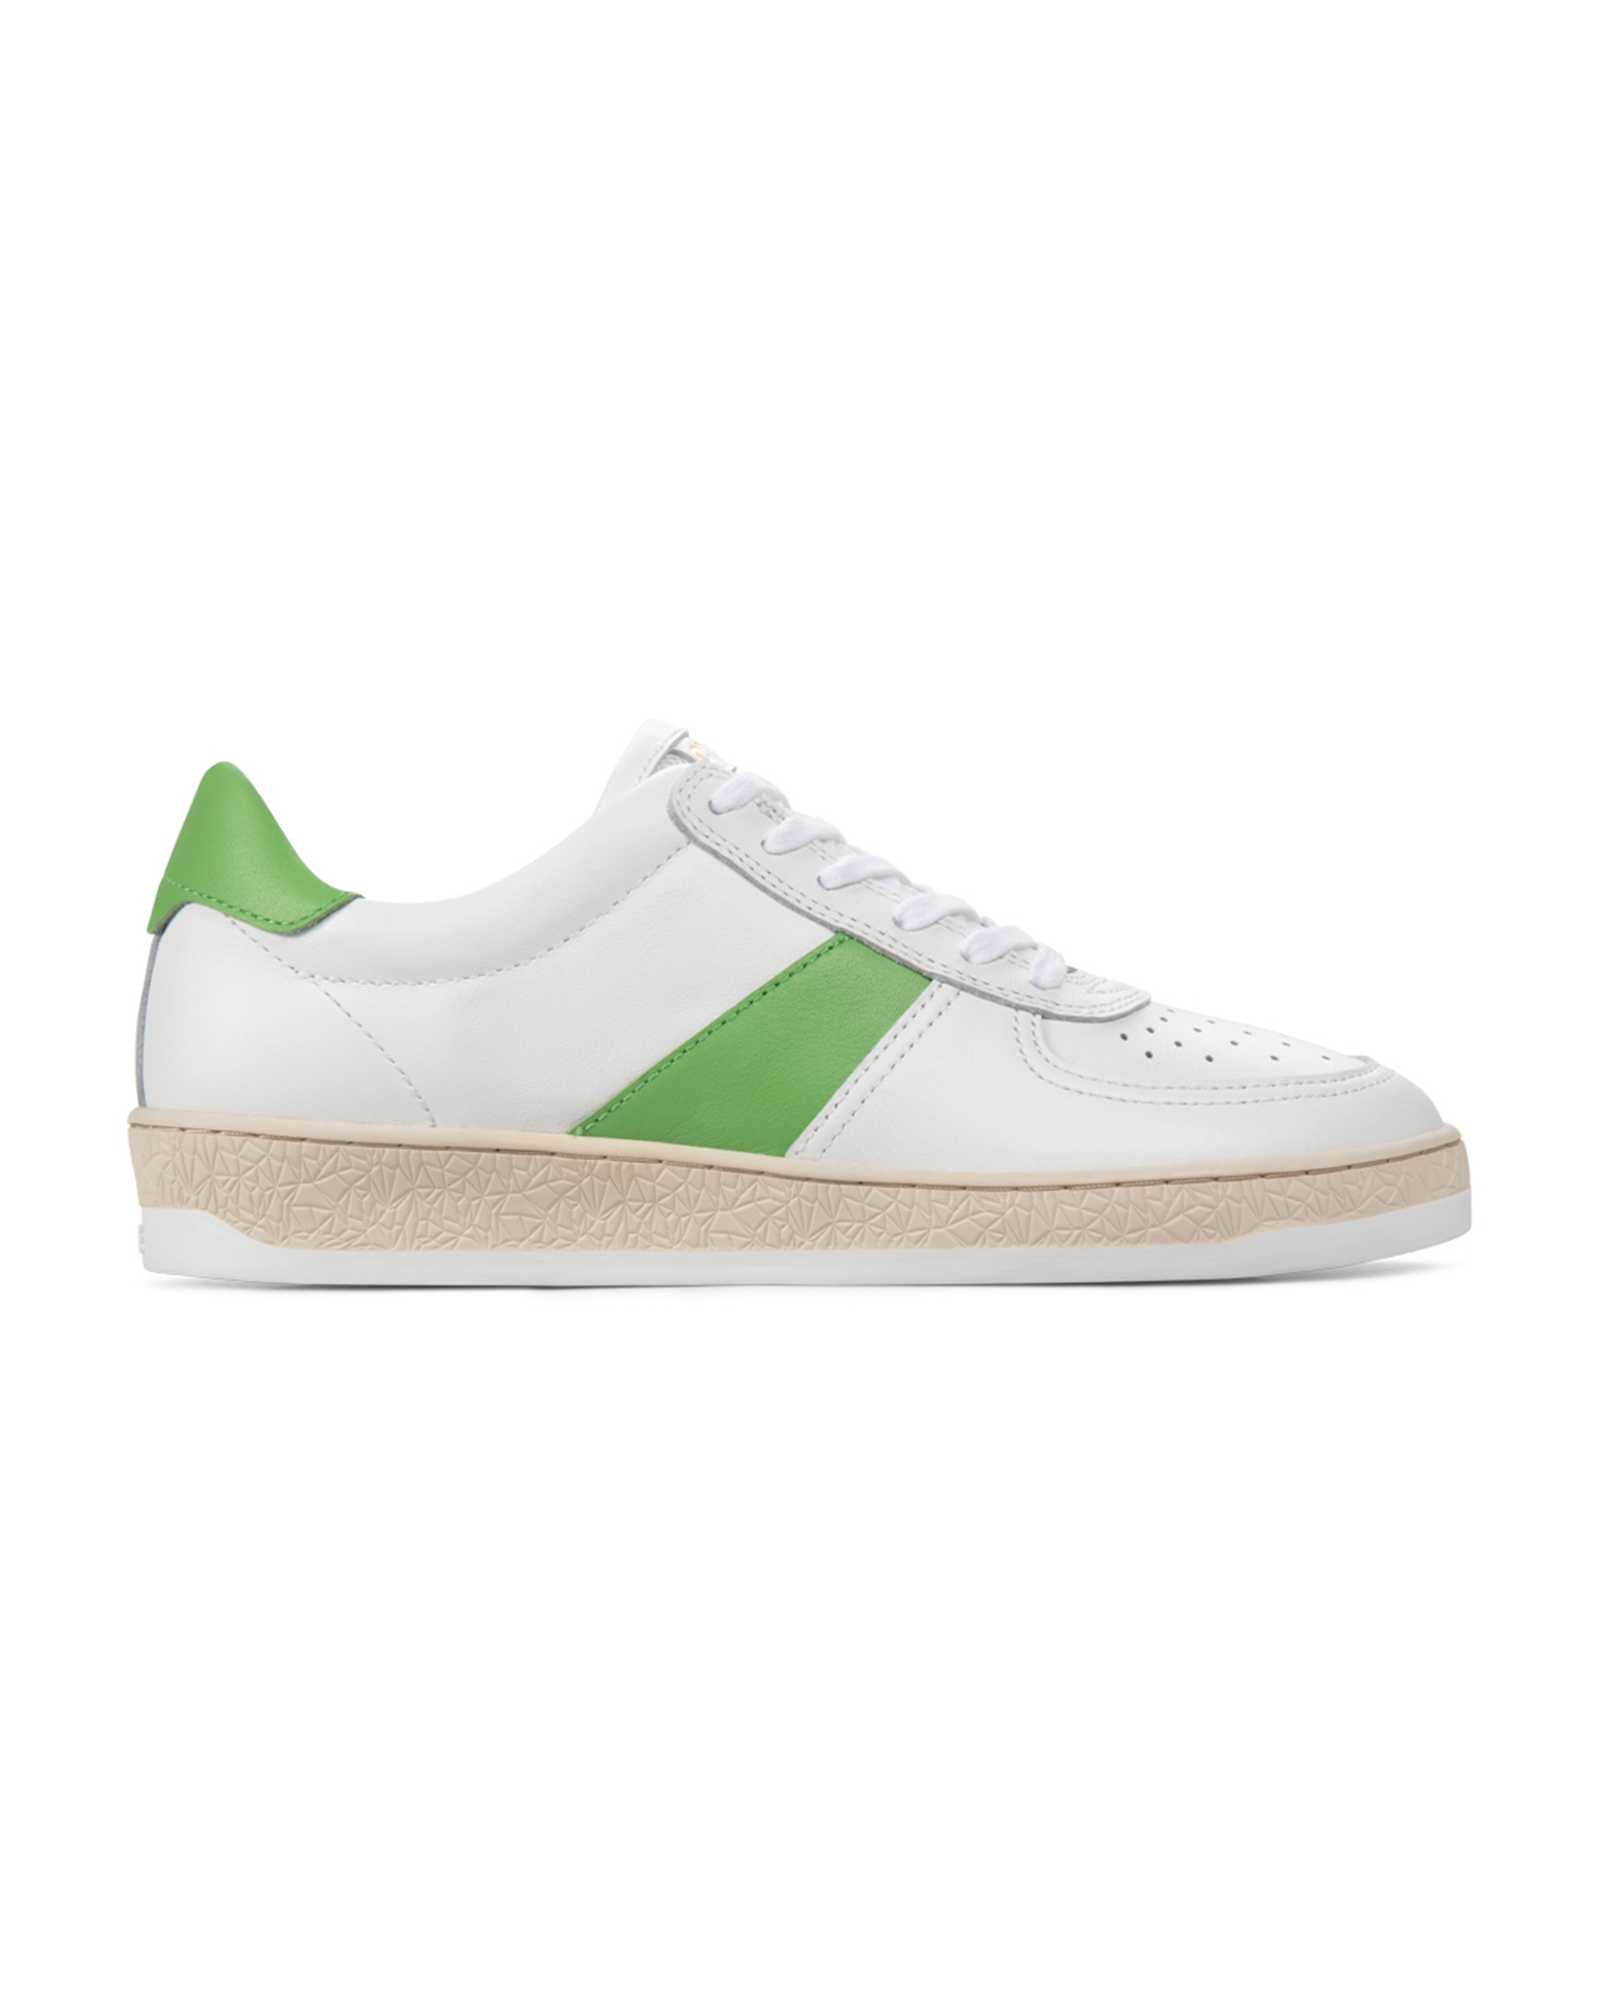 White/Green/Leather